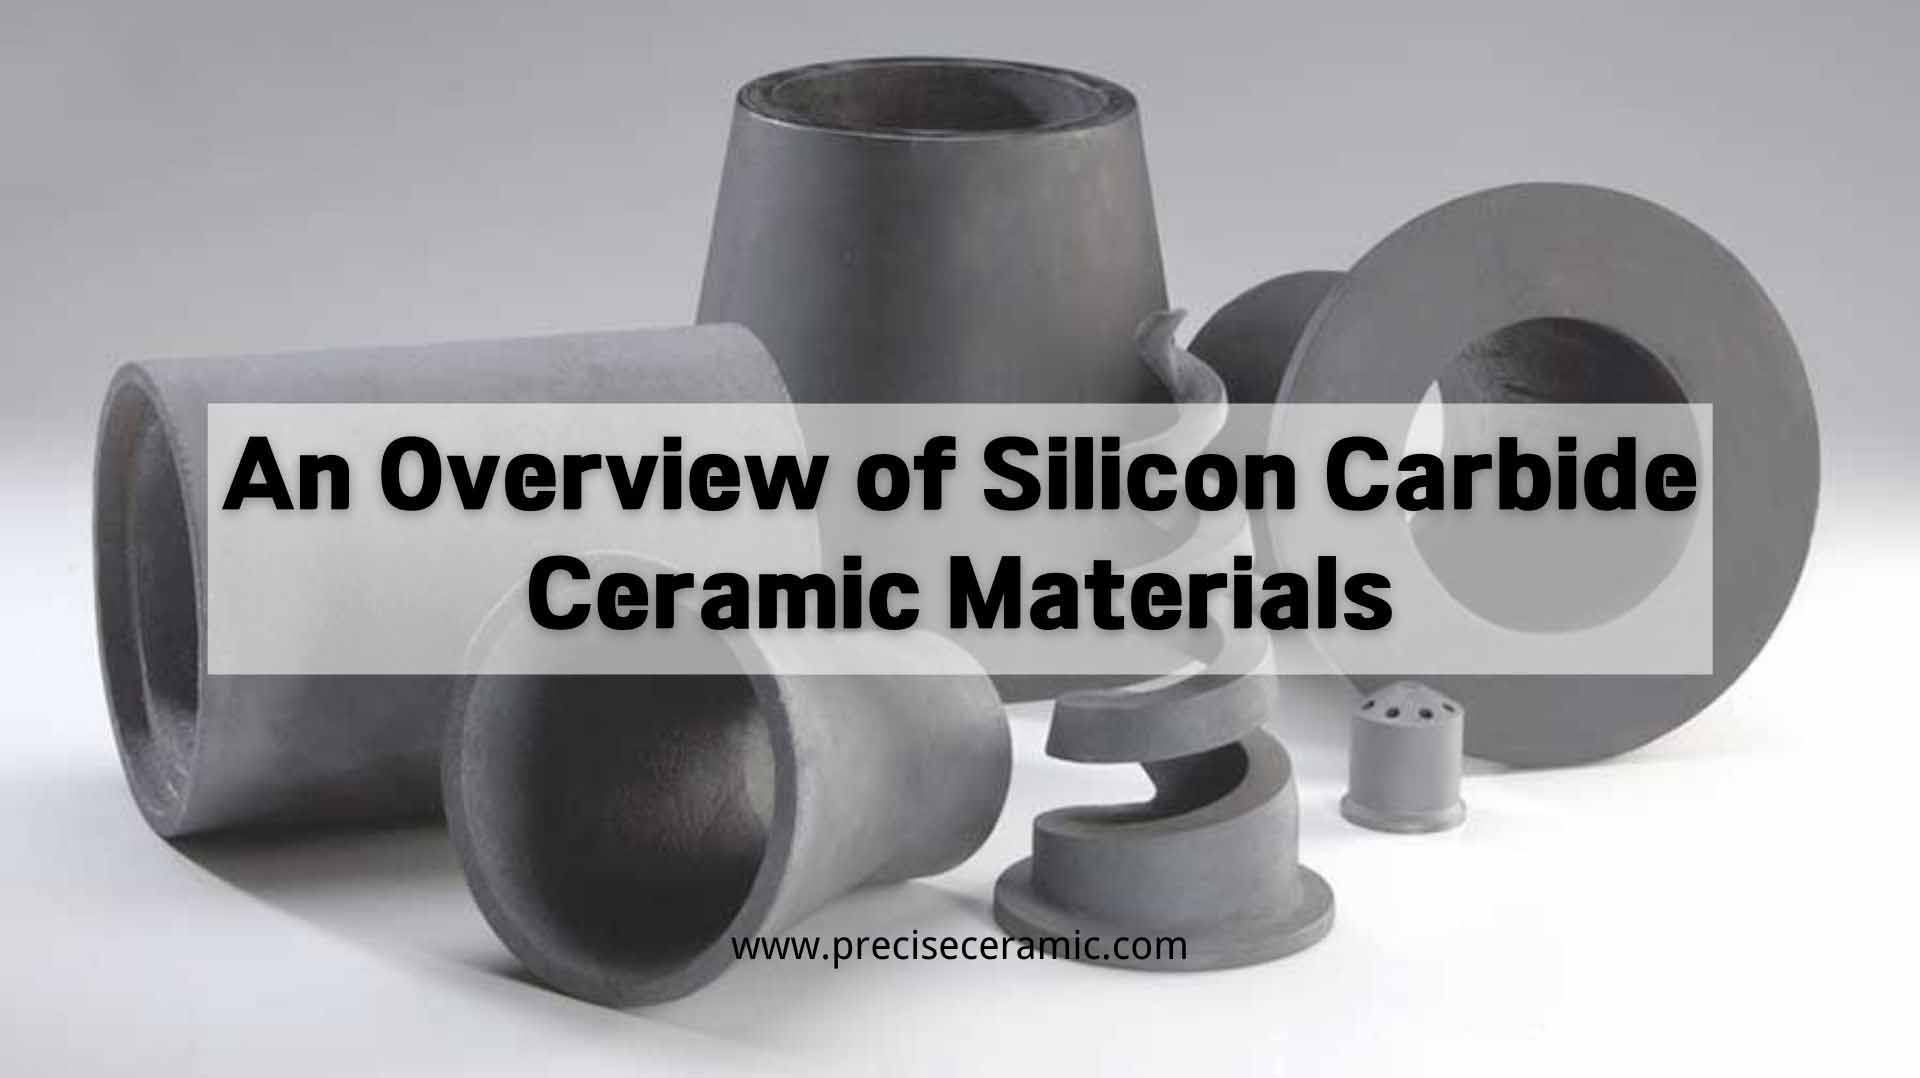 An Overview of Silicon Carbide Ceramic Materials